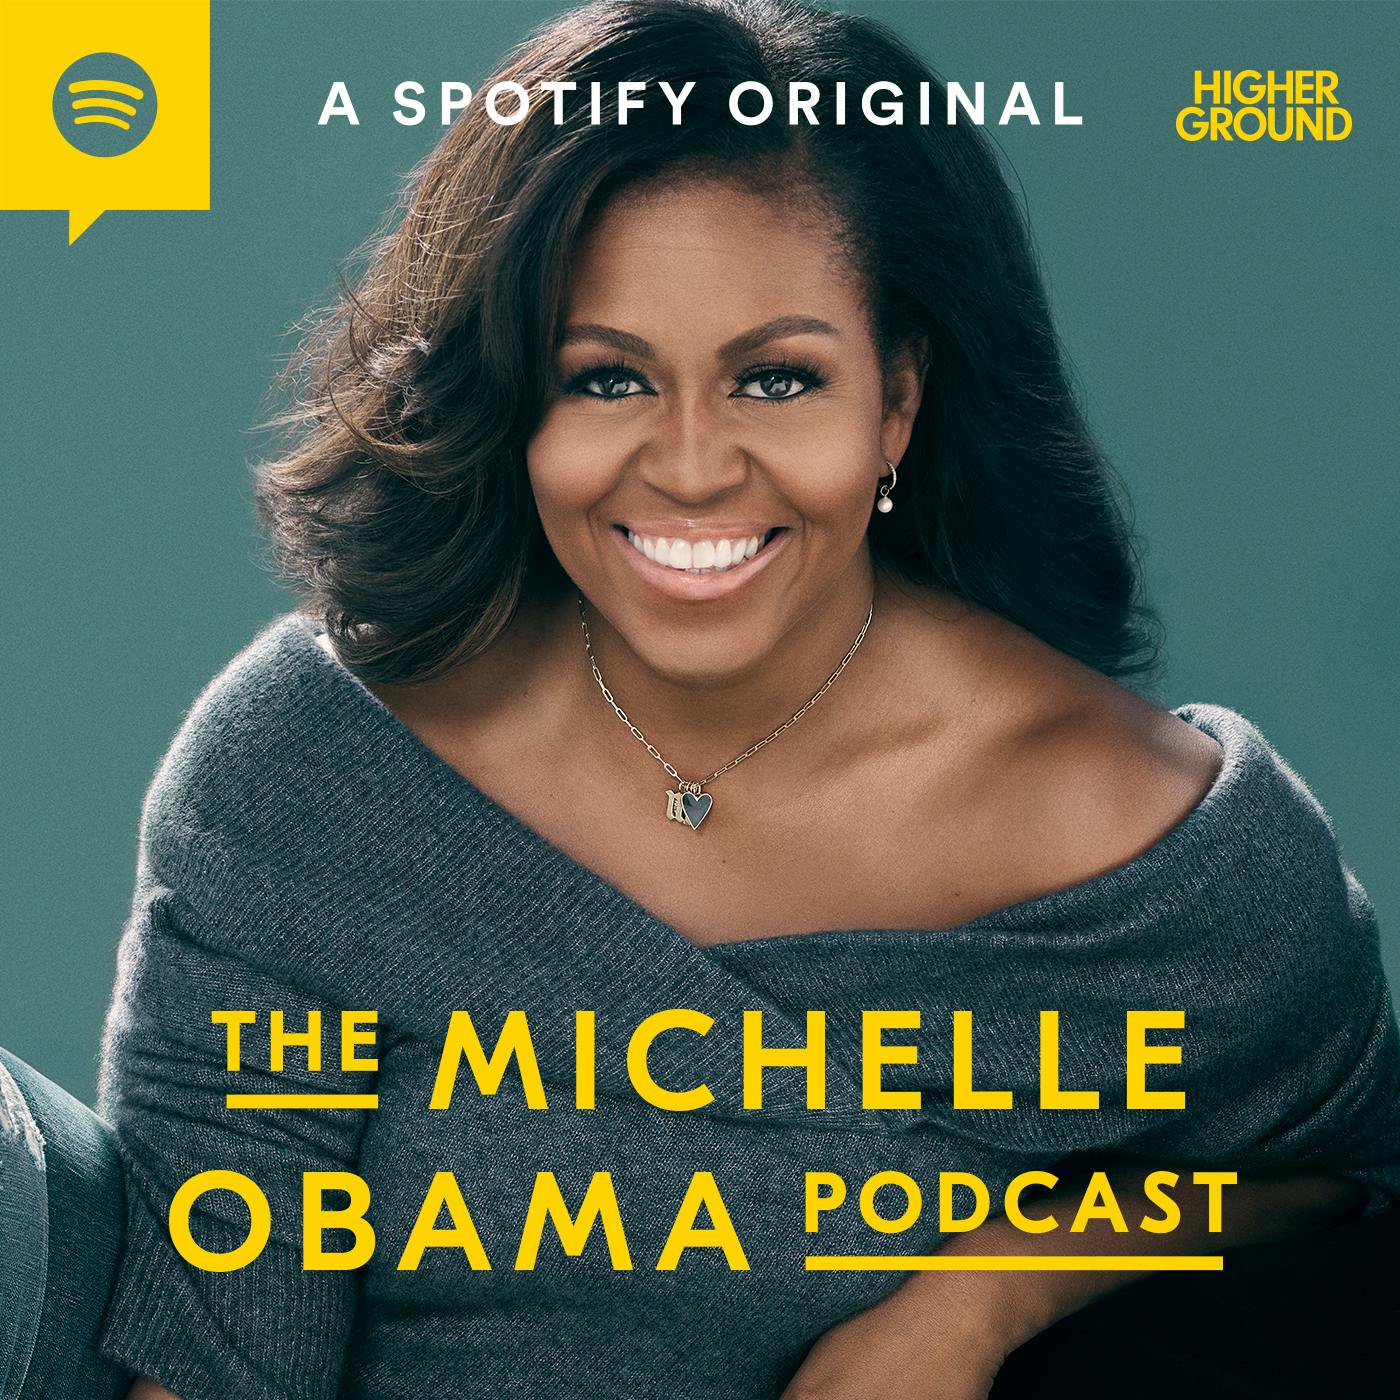 The Michelle Obama Podcast podcast show image